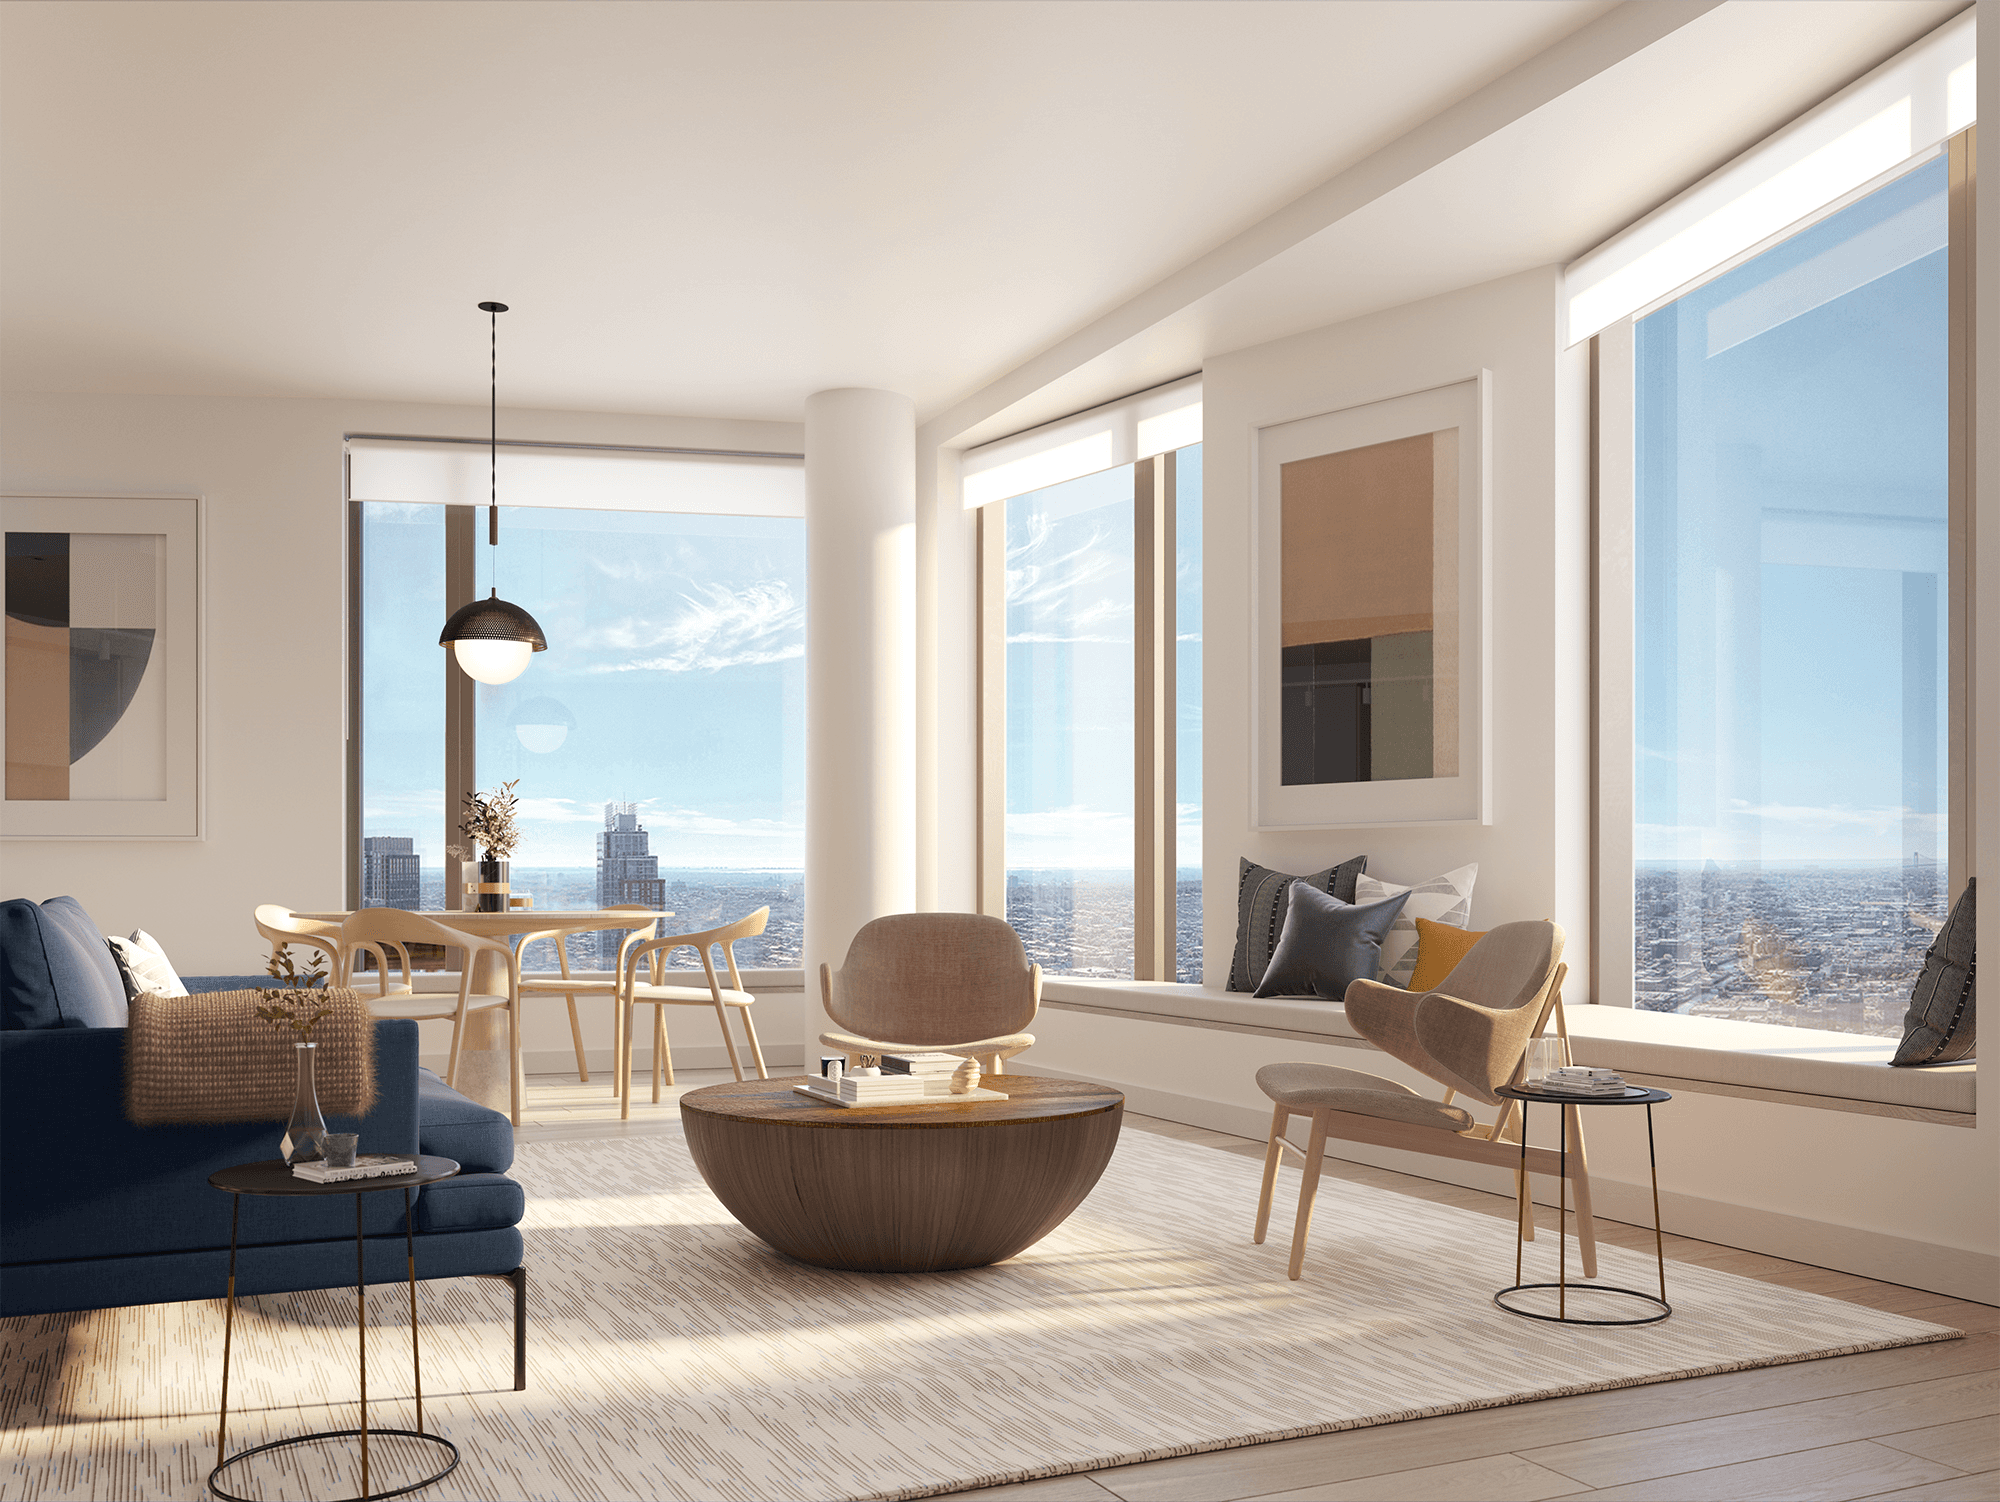 Tishman Speyers 11 Hoyt sets Brooklyns new standard for architecture and design.